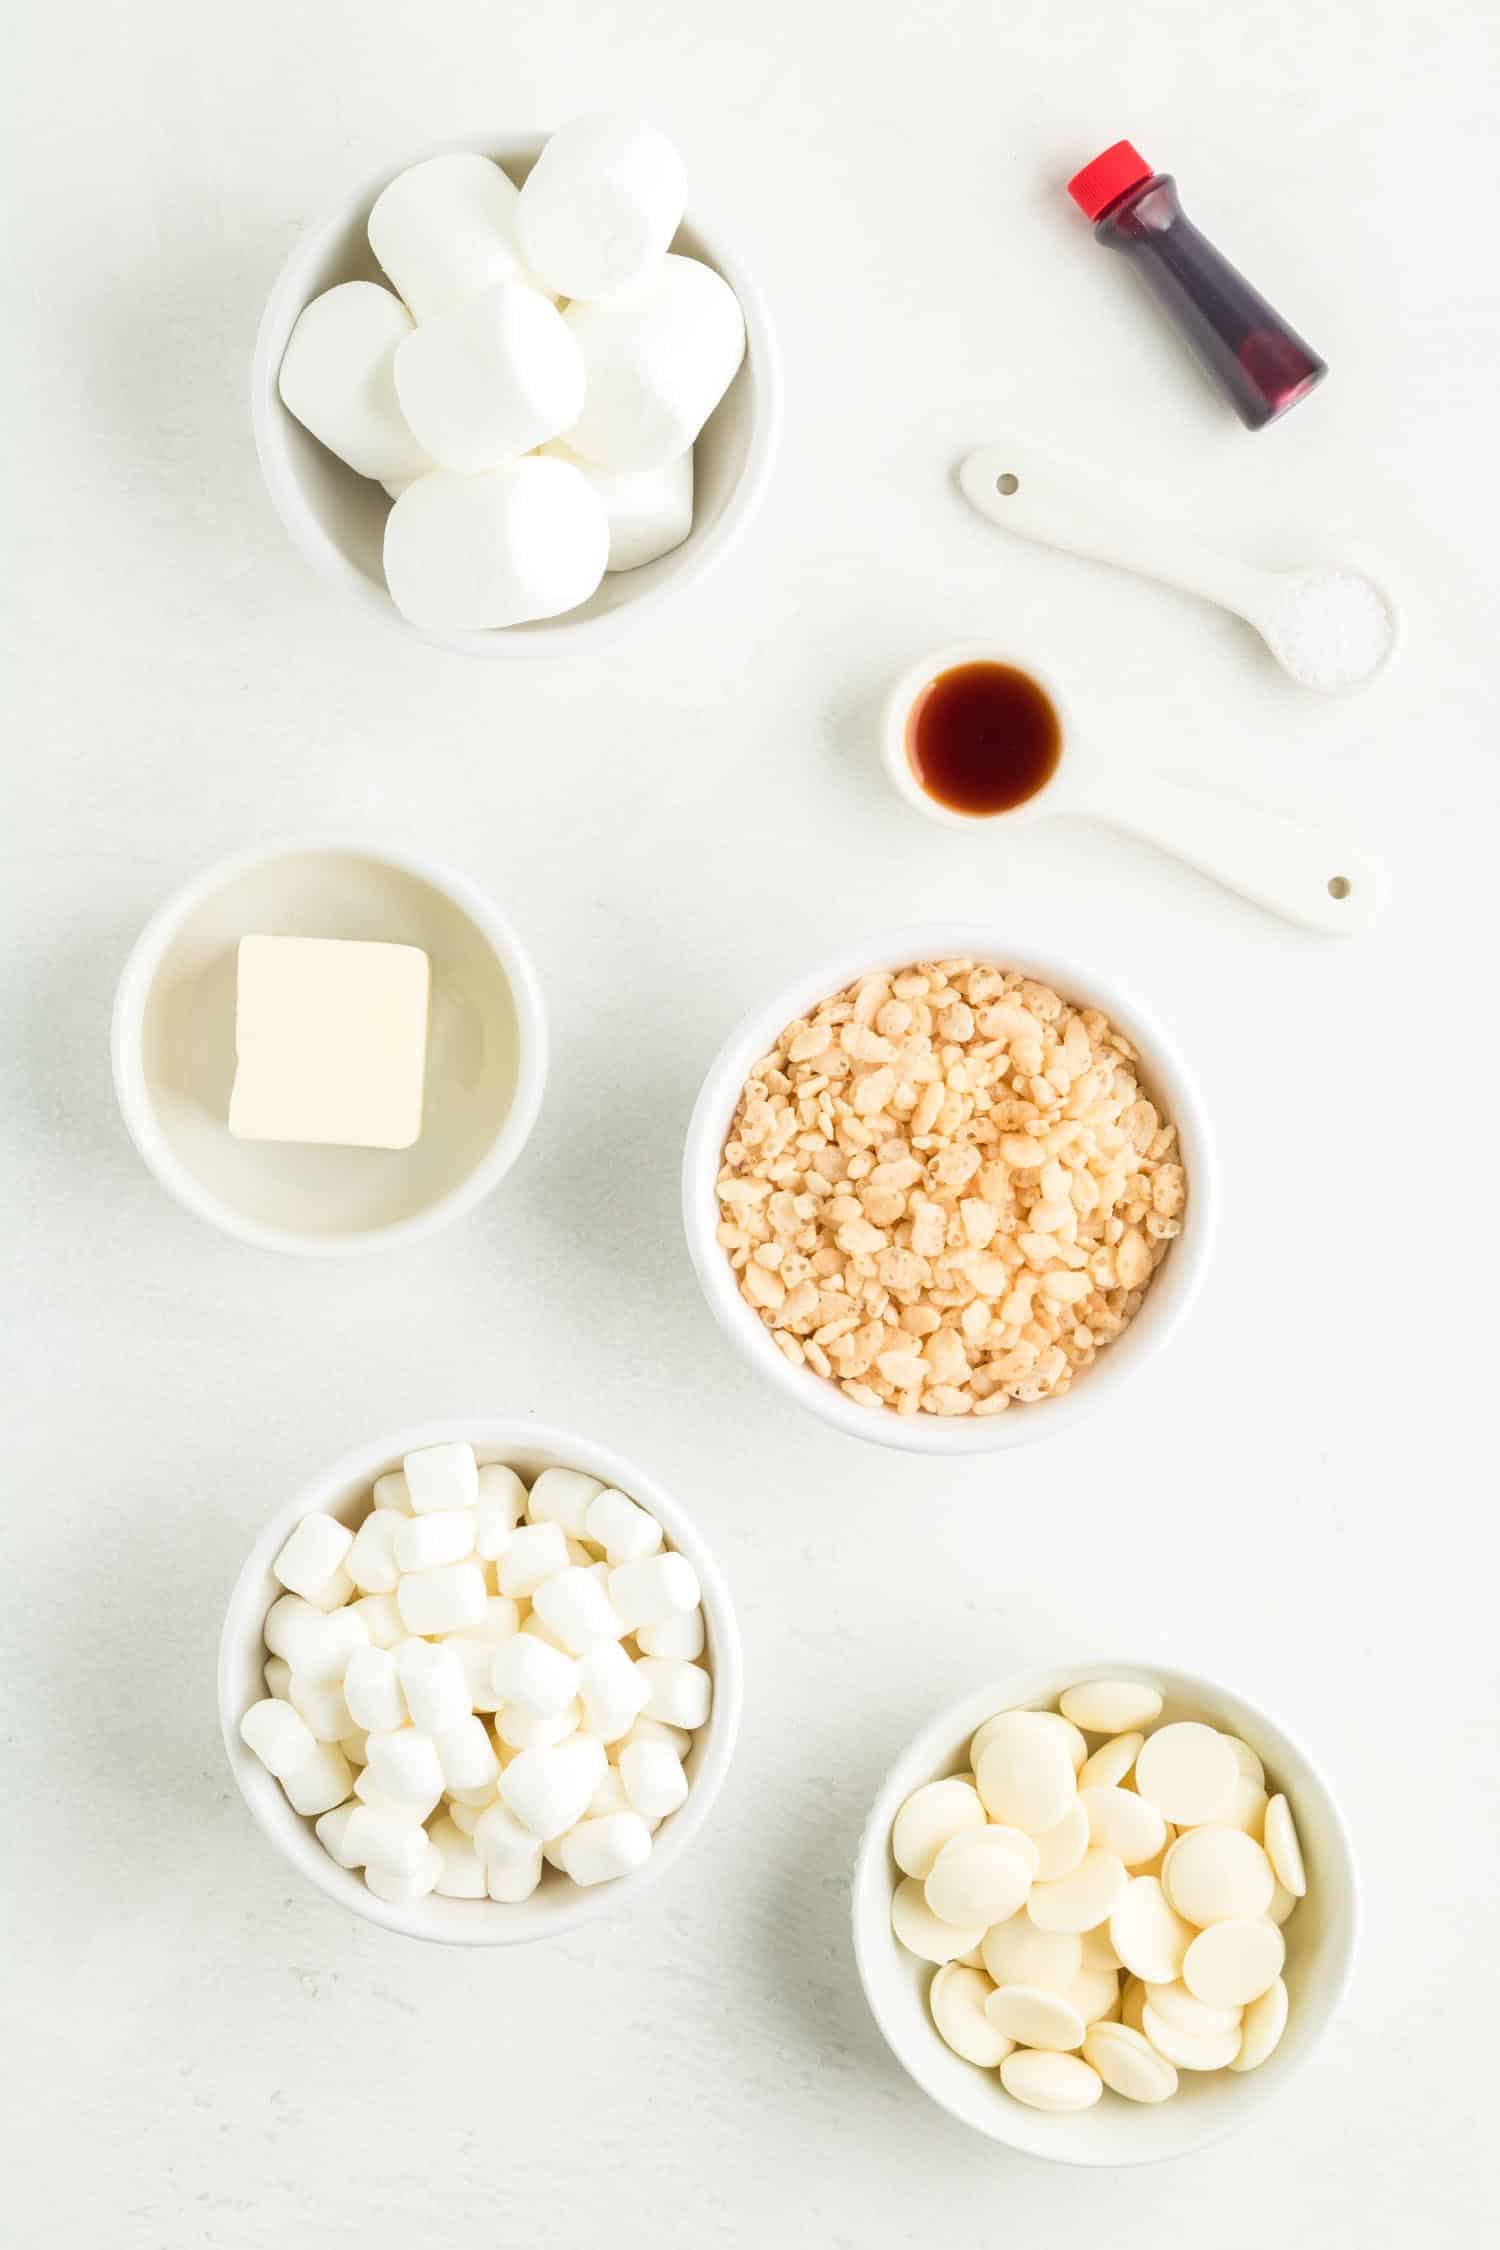 Individual ingredients for Rice Krispie Treats shown in bowls